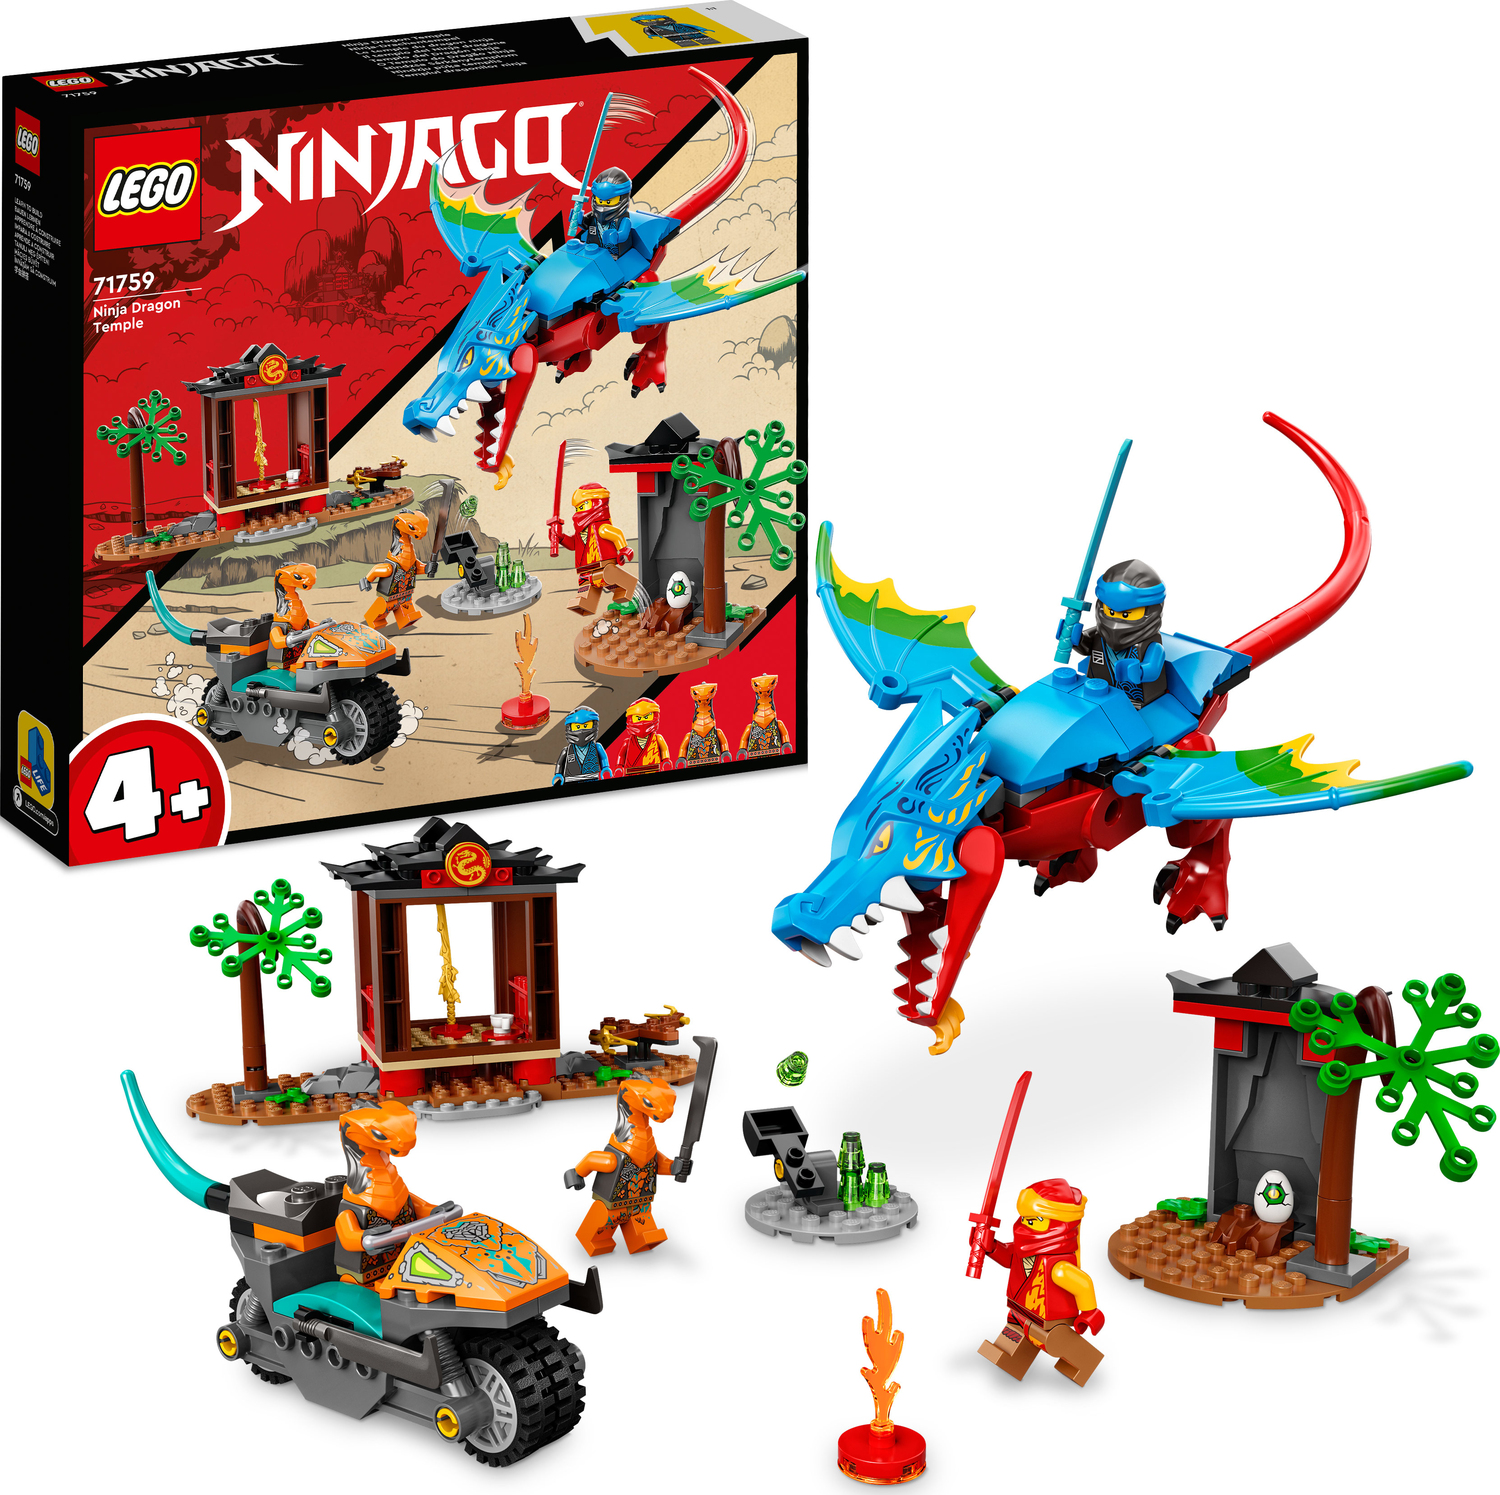 LEGO NINJAGO Dragon Temple Building - Givens Books and Dickens